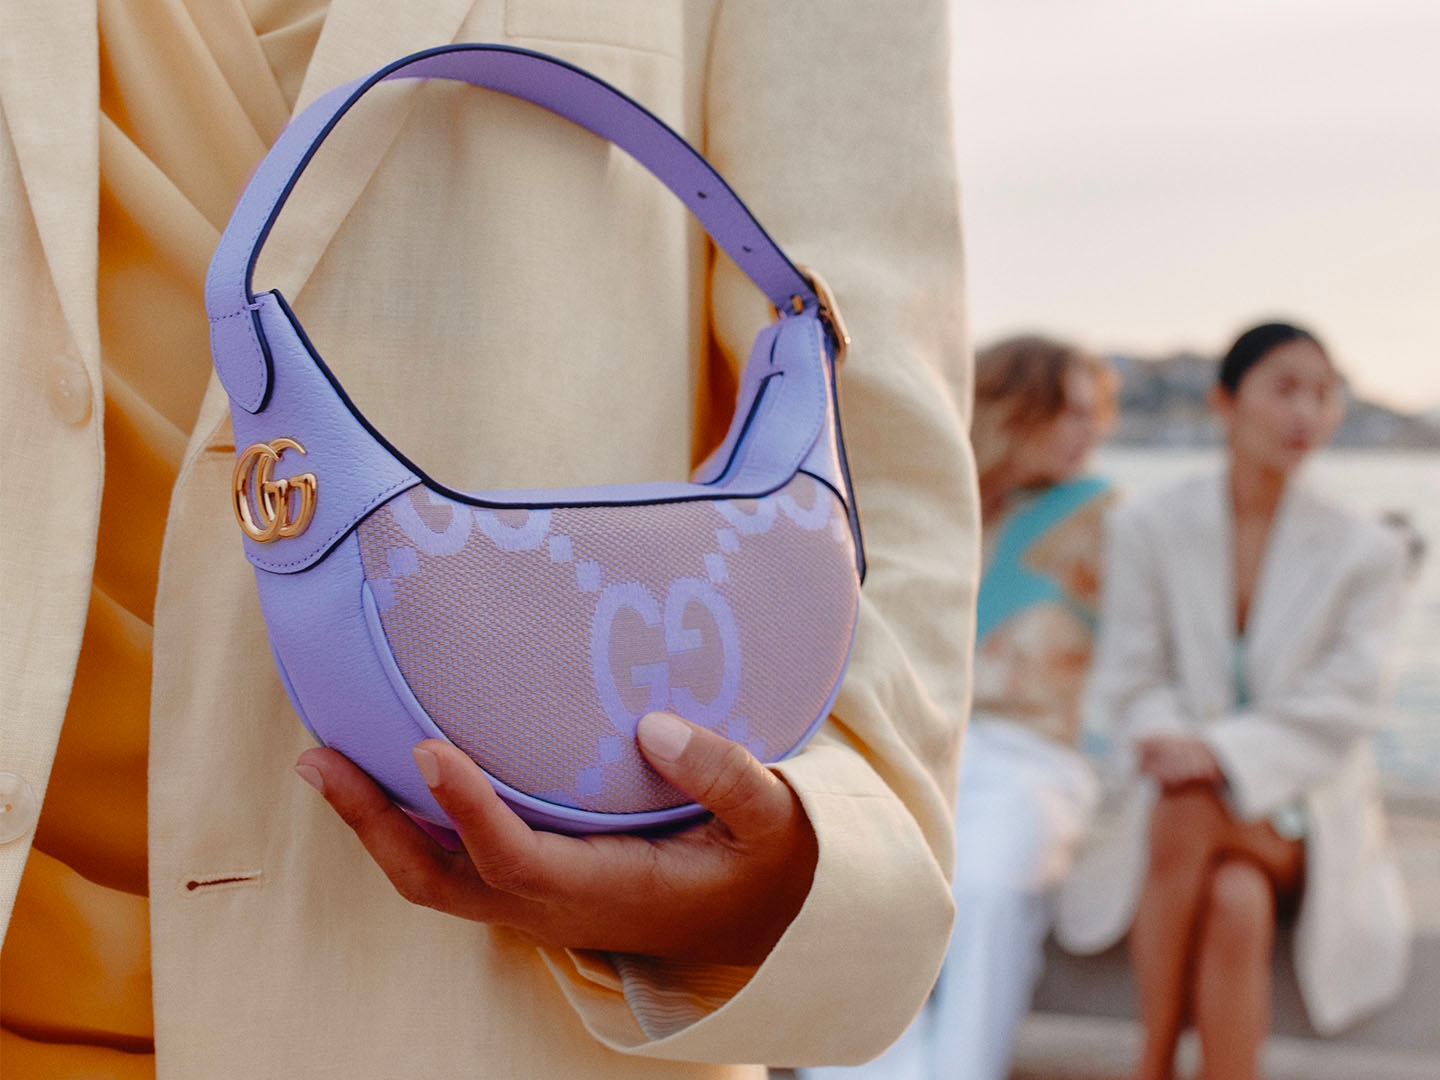 The 13 Most Popular Designer Handbags As Told by Experts  Who What Wear